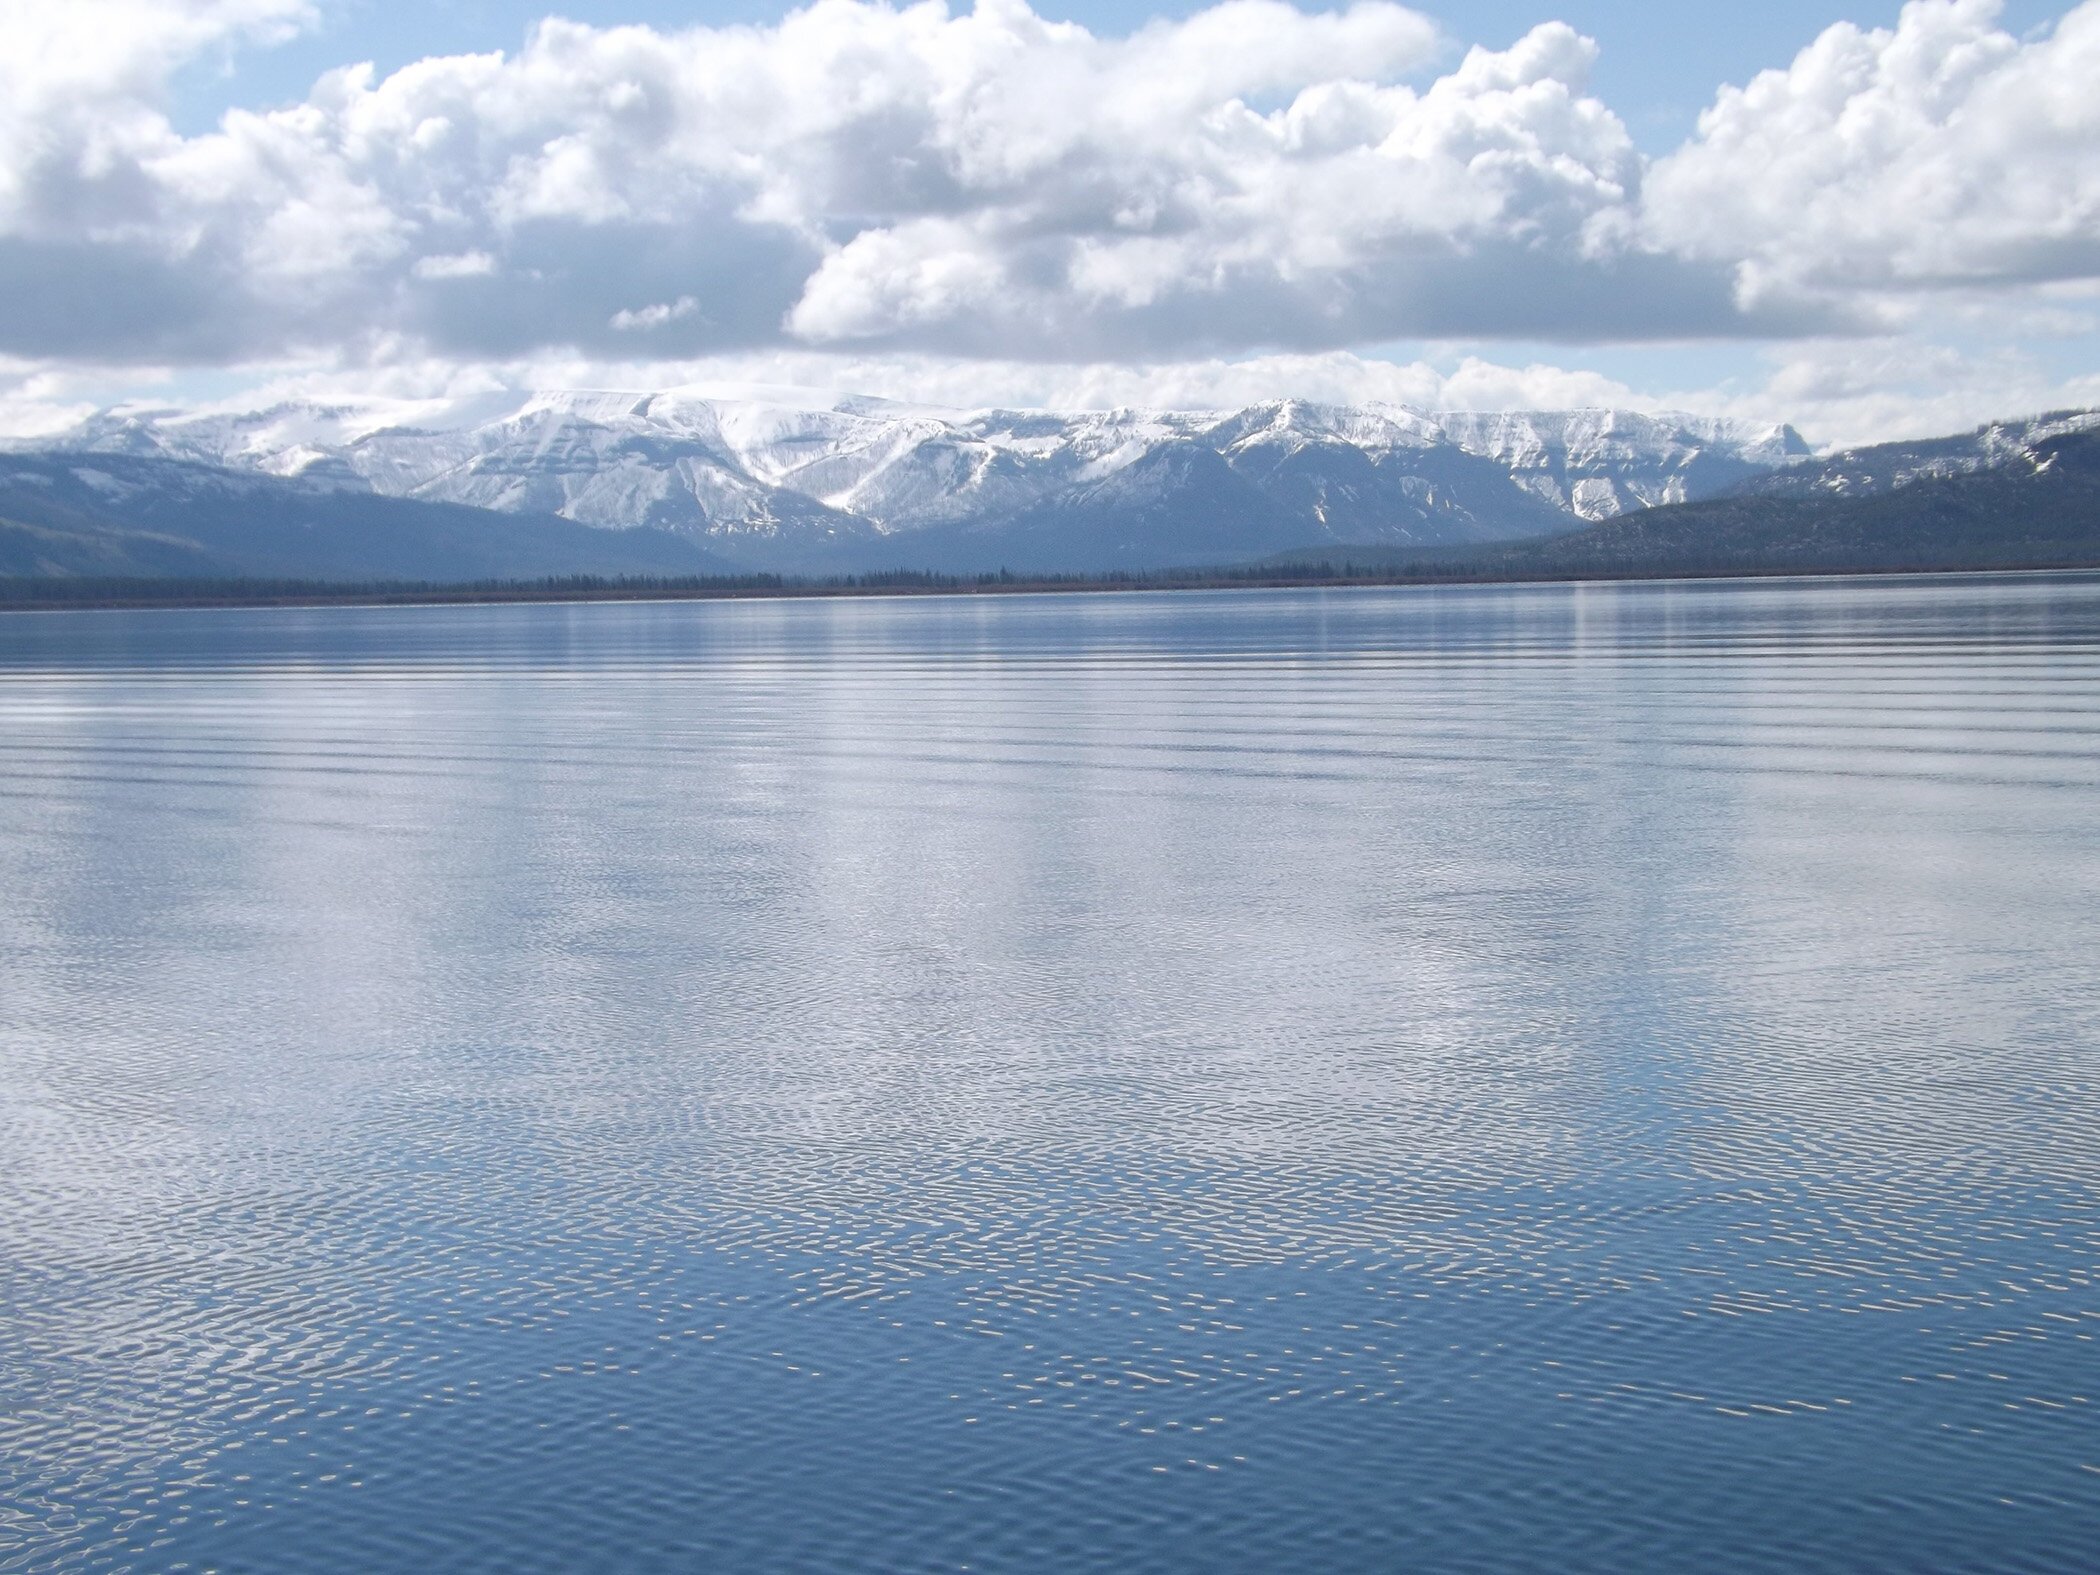 Yellowstone Lake ice cover unchanged despite warming climate